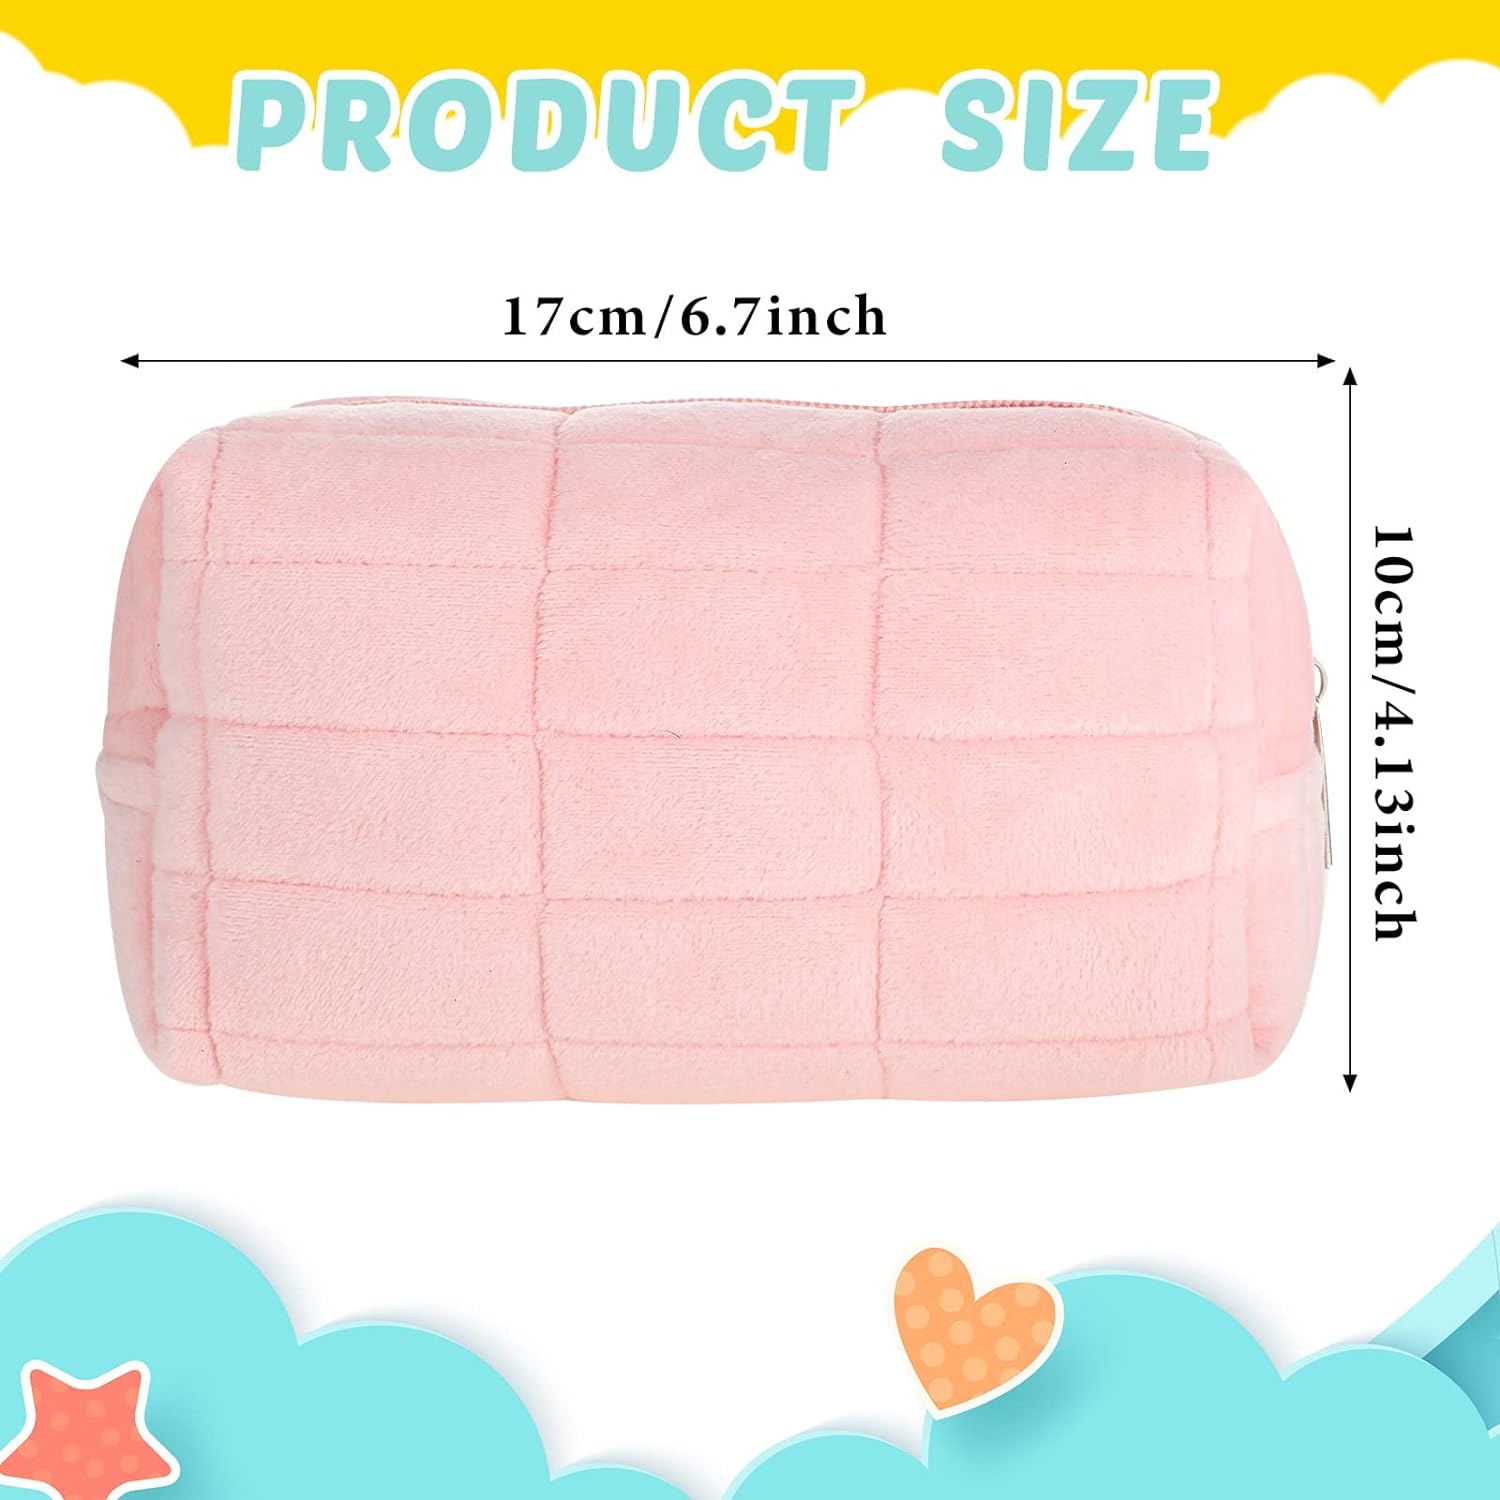 SkyShopy 1 Pcs Plush Makeup Bag Checkered Cosmetic Bag Cosmetic Travel Bag Large Zipper Travel Toiletry Bag Portable Multi Functional Capacity Bag Cute Makeup Brushes Storage Bag for Women, Pink, Blue, White, pink, blue, white, approx. 4.13 x 6.69 inches